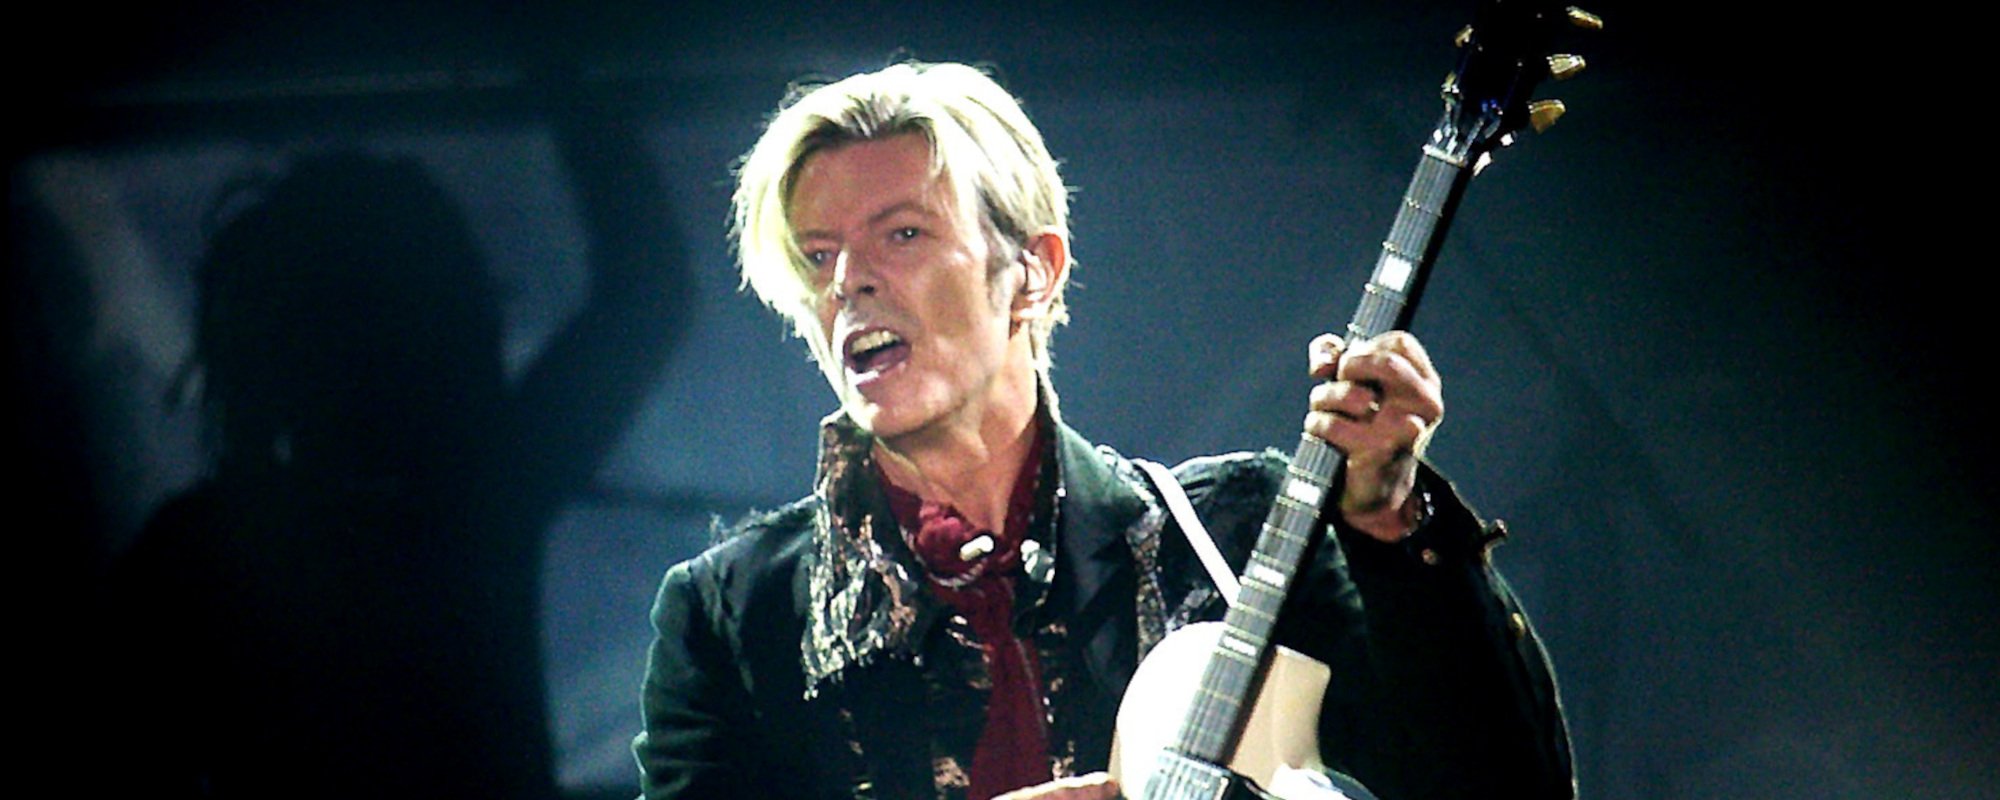 12 of David Bowie's Favorite David Bowie Songs